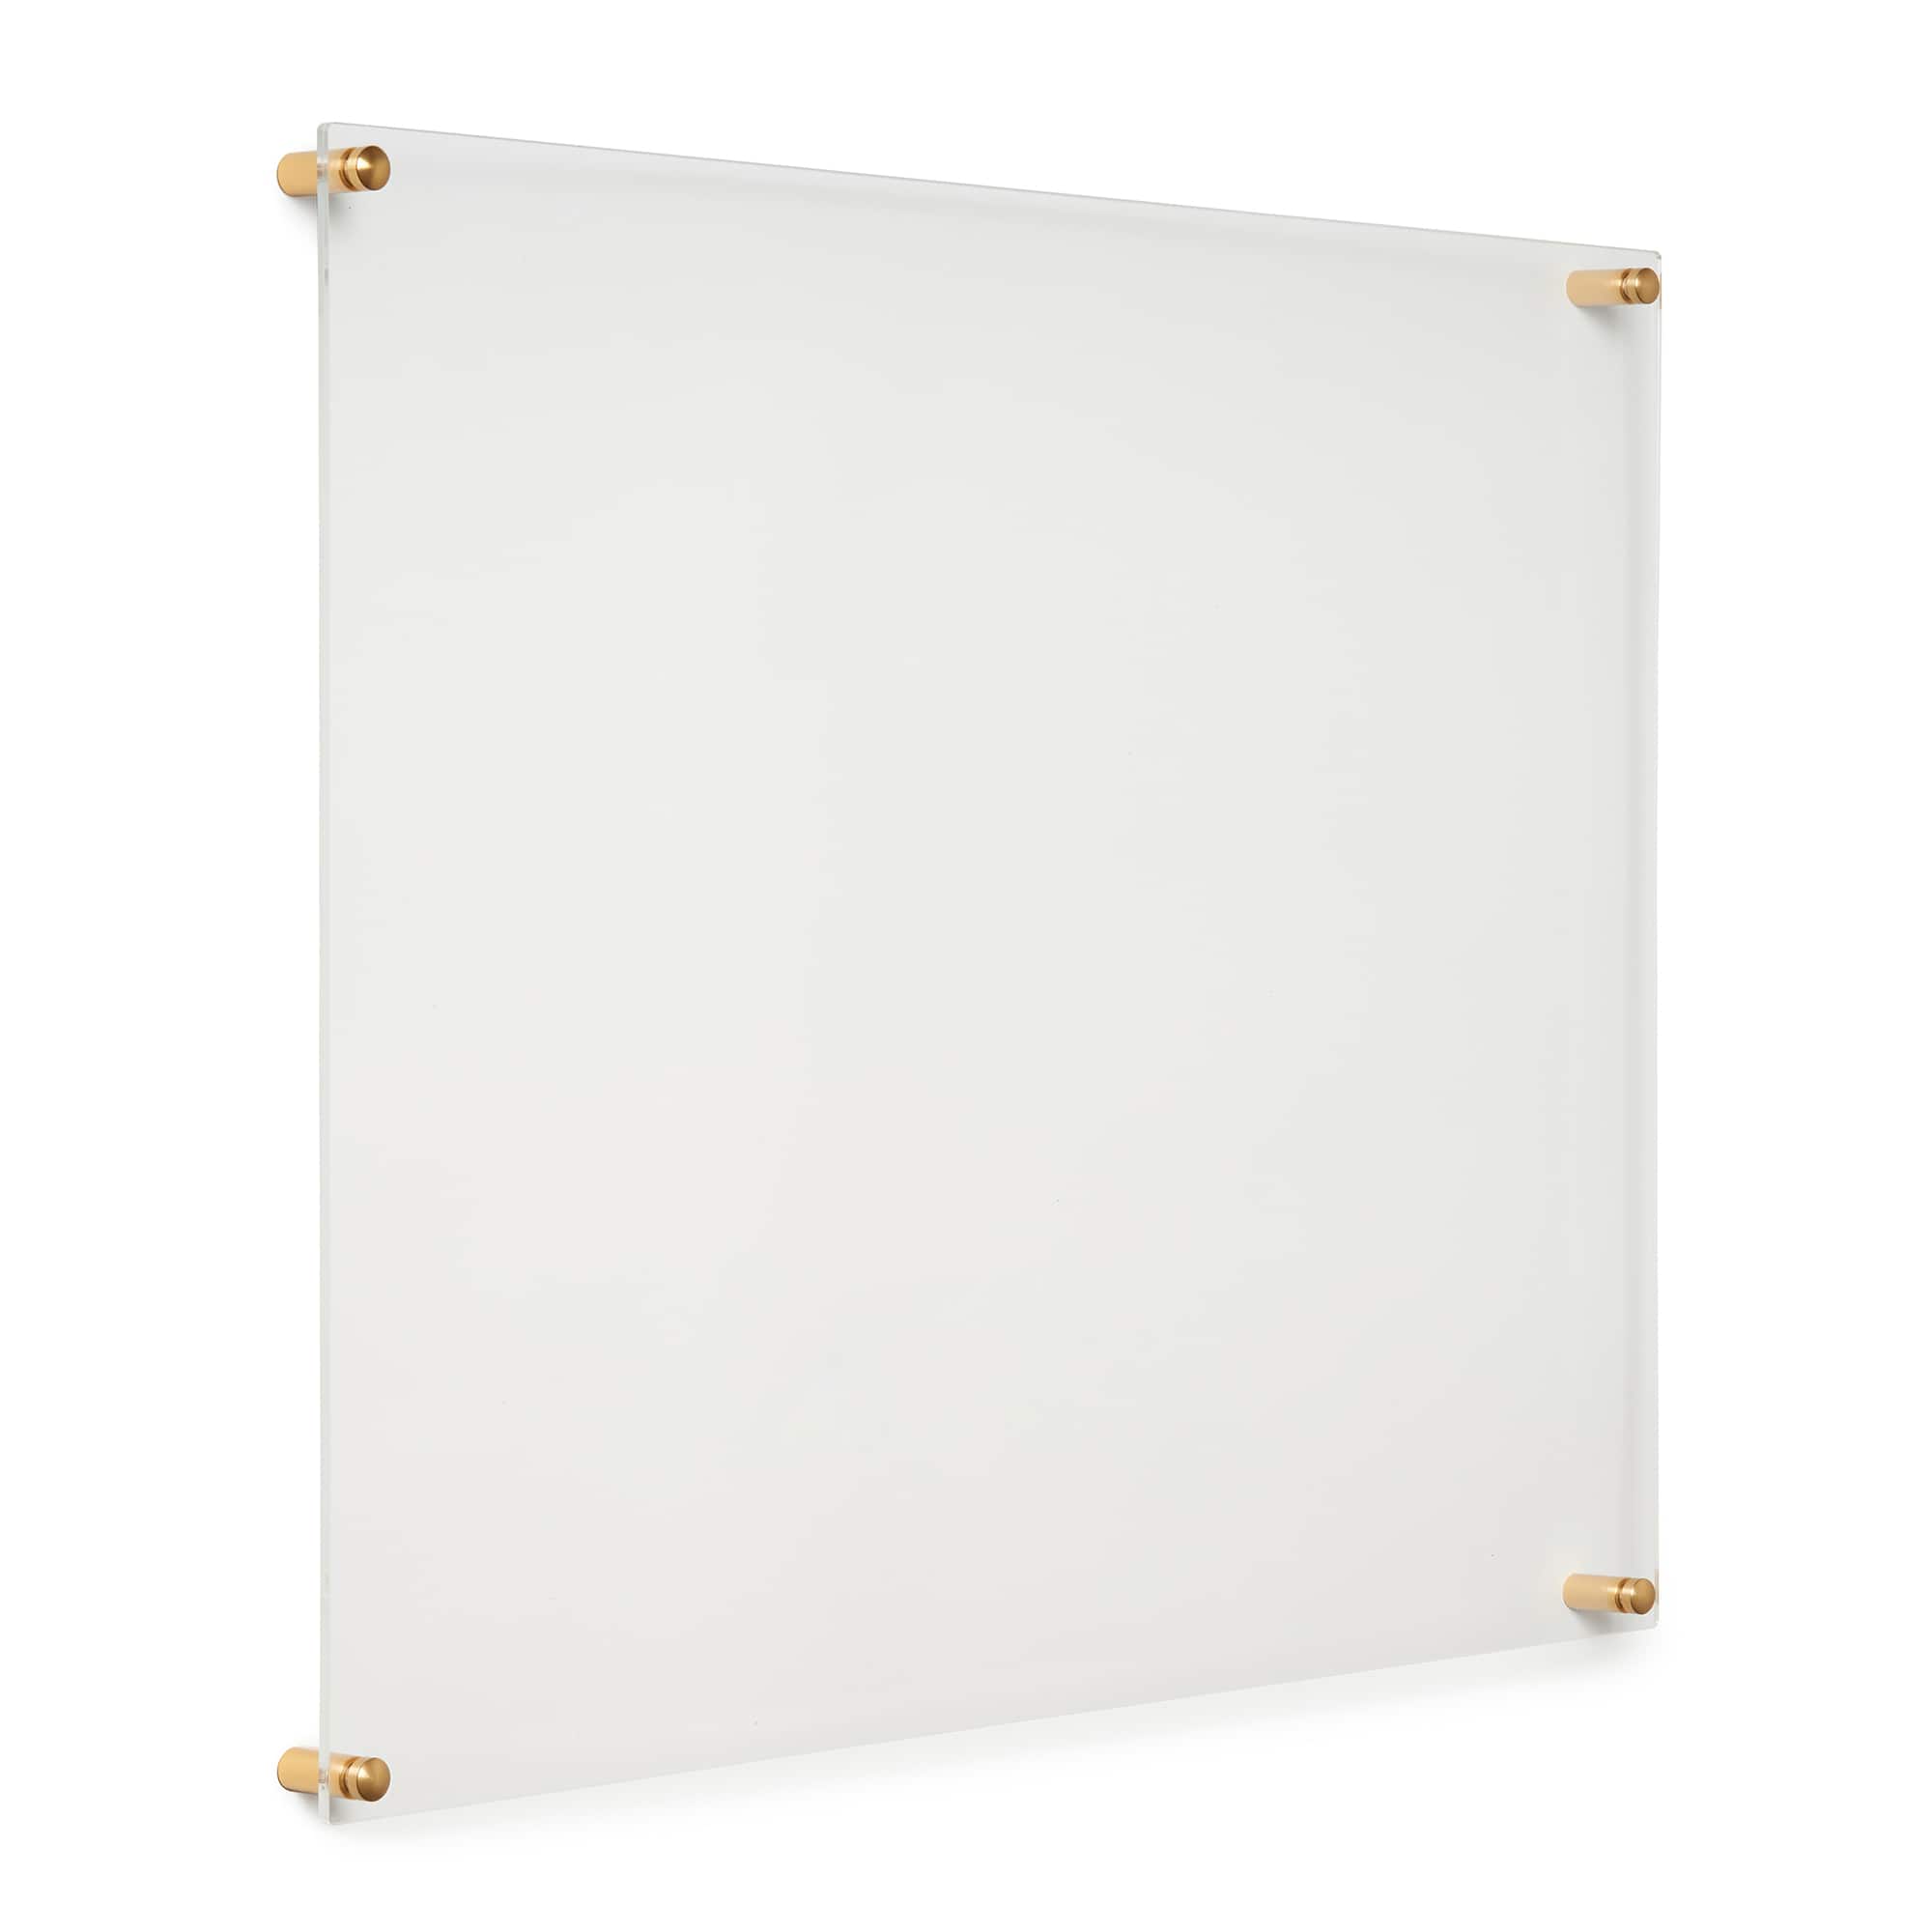 Cool Modern Frames Clear Acrylic Float Frame with Gold Hardware